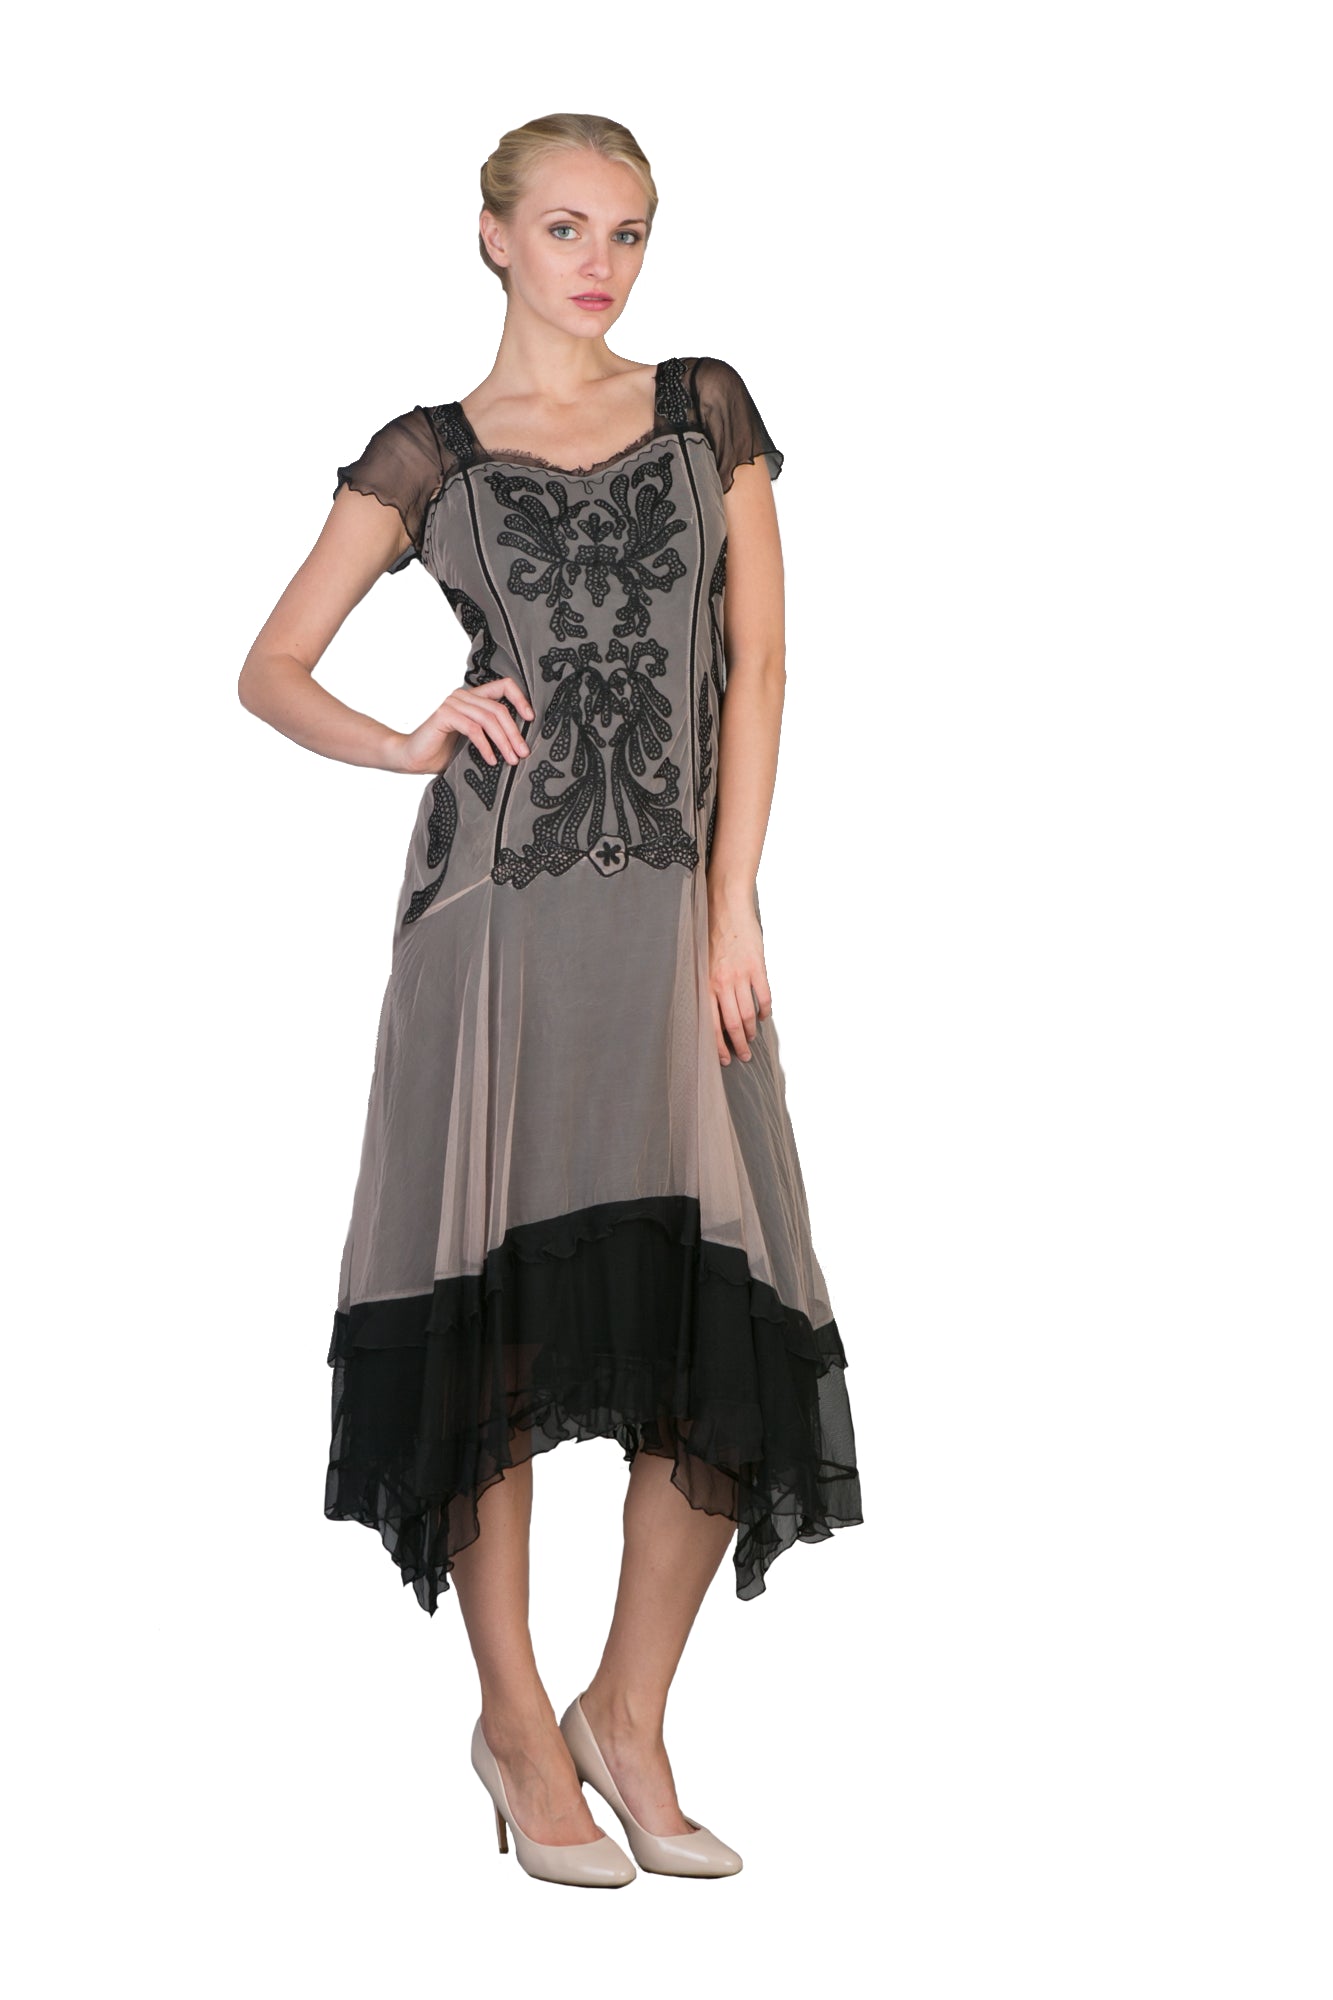 Embroidered Ruffled Vintage Inspired Dress in Black-Beige by Nataya - SOLD OUT